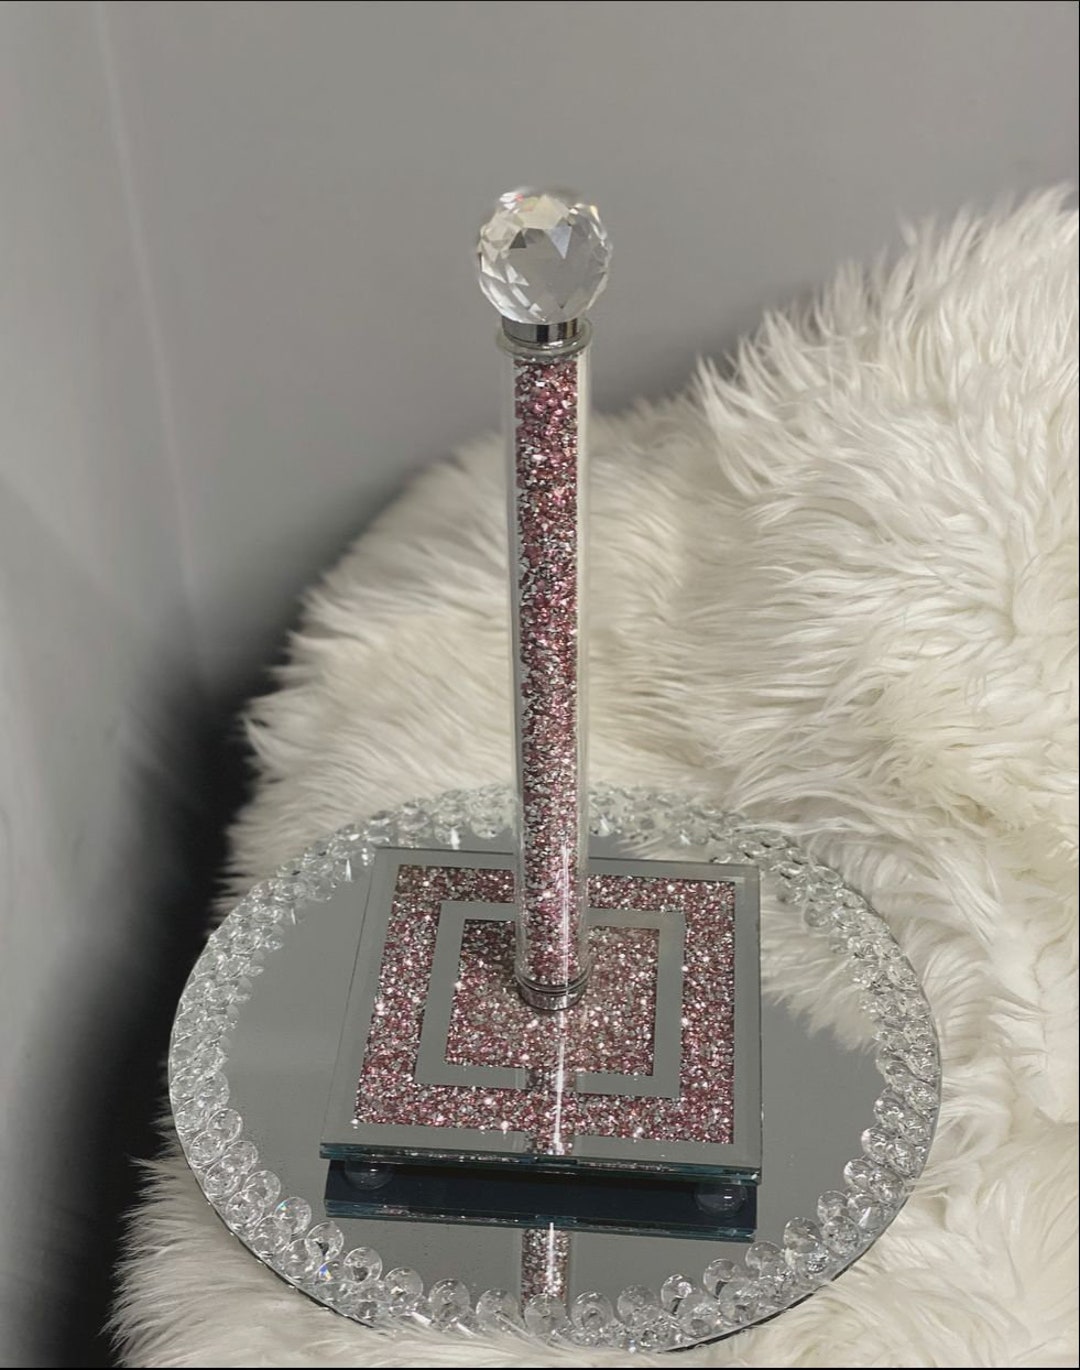 Stainless Steel Paper Towel Holder w/Clear Crystal Top